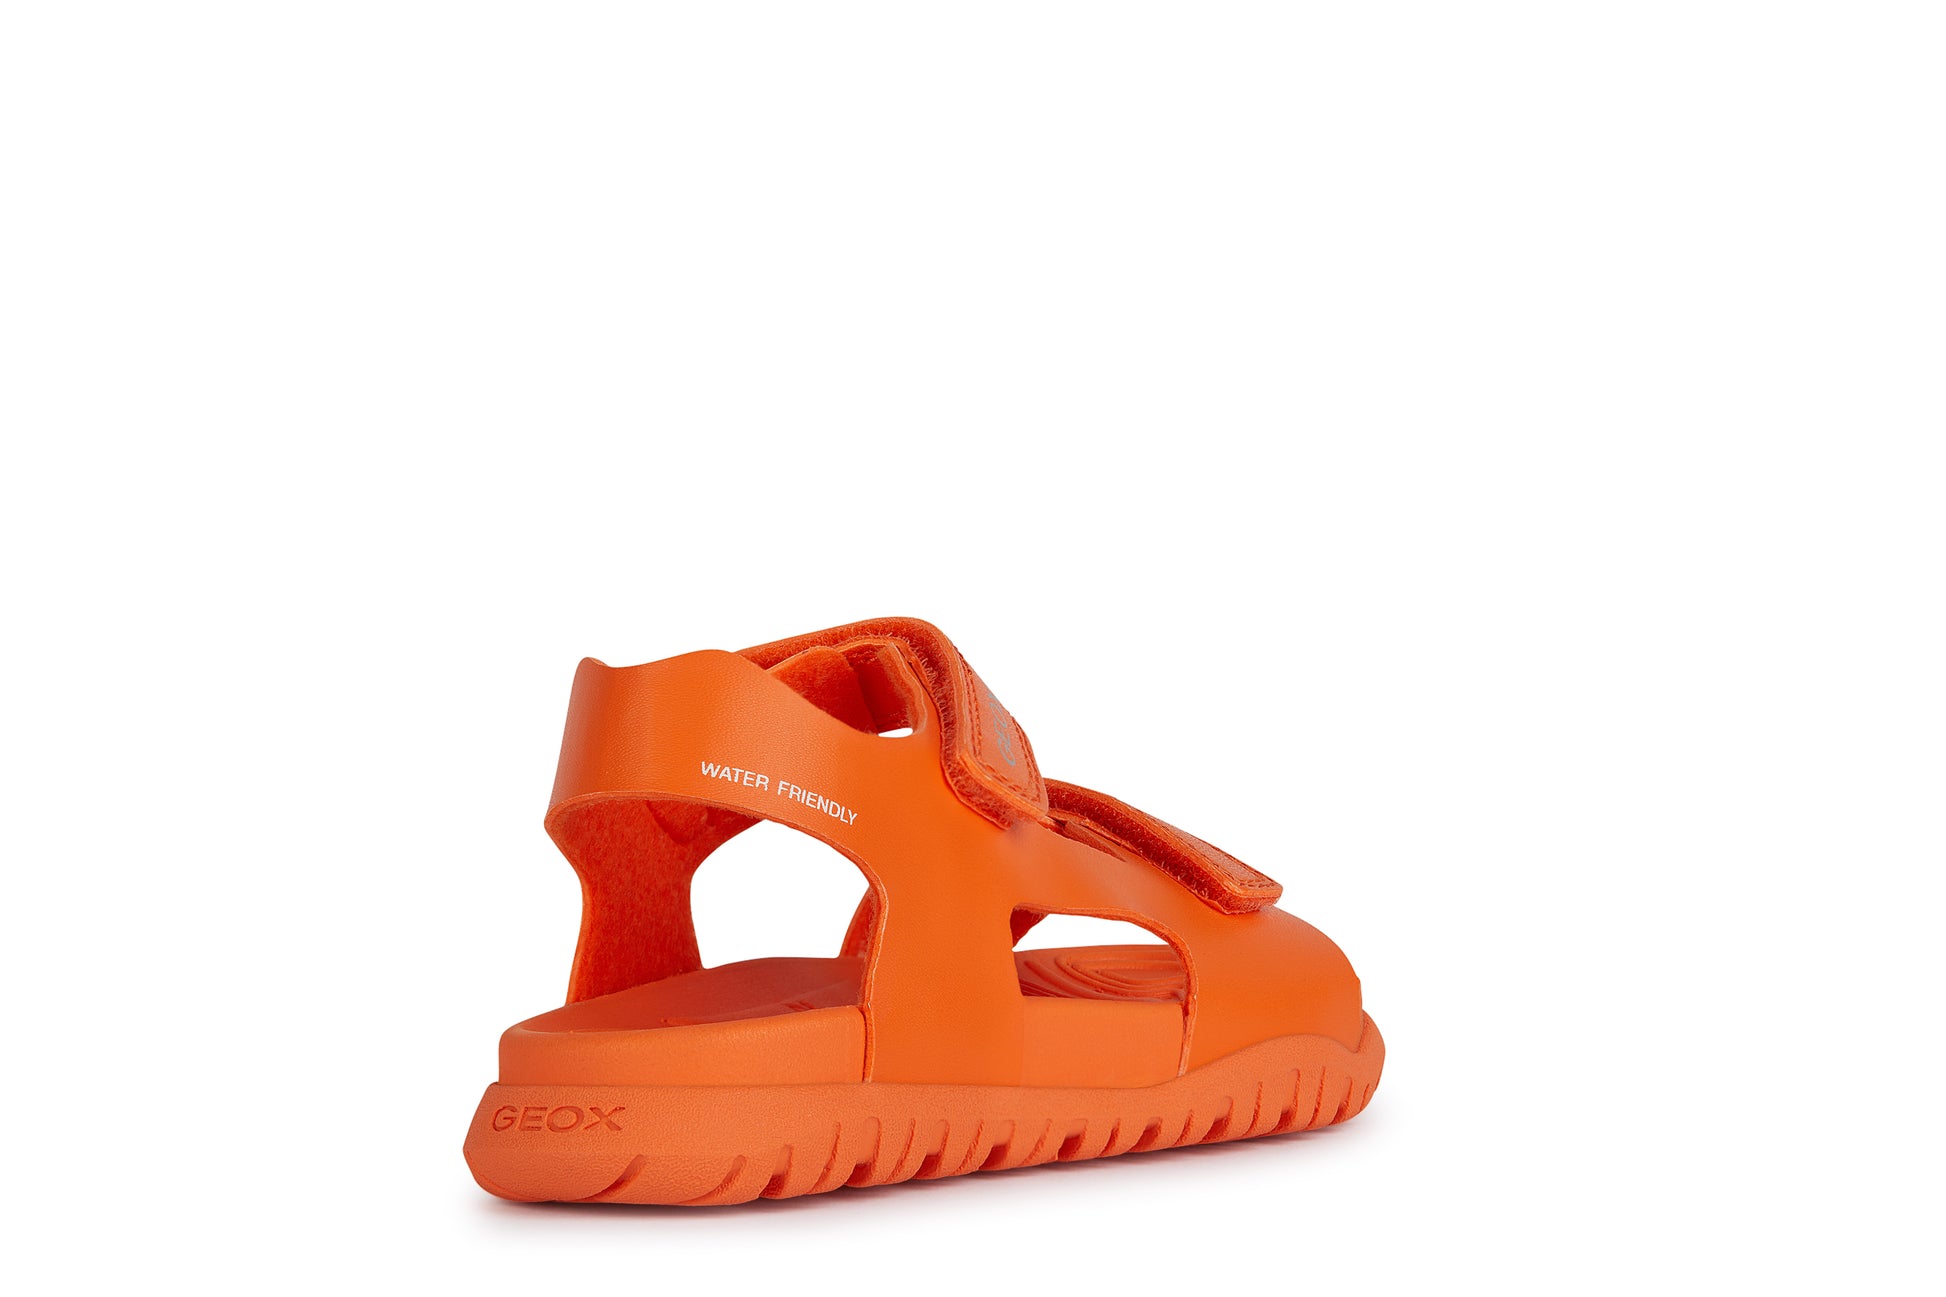 A unisex open toe synthetic water friendly sandal by Geox. Style Fusbetto in orange with two velcro fastenings. Back angled left view.